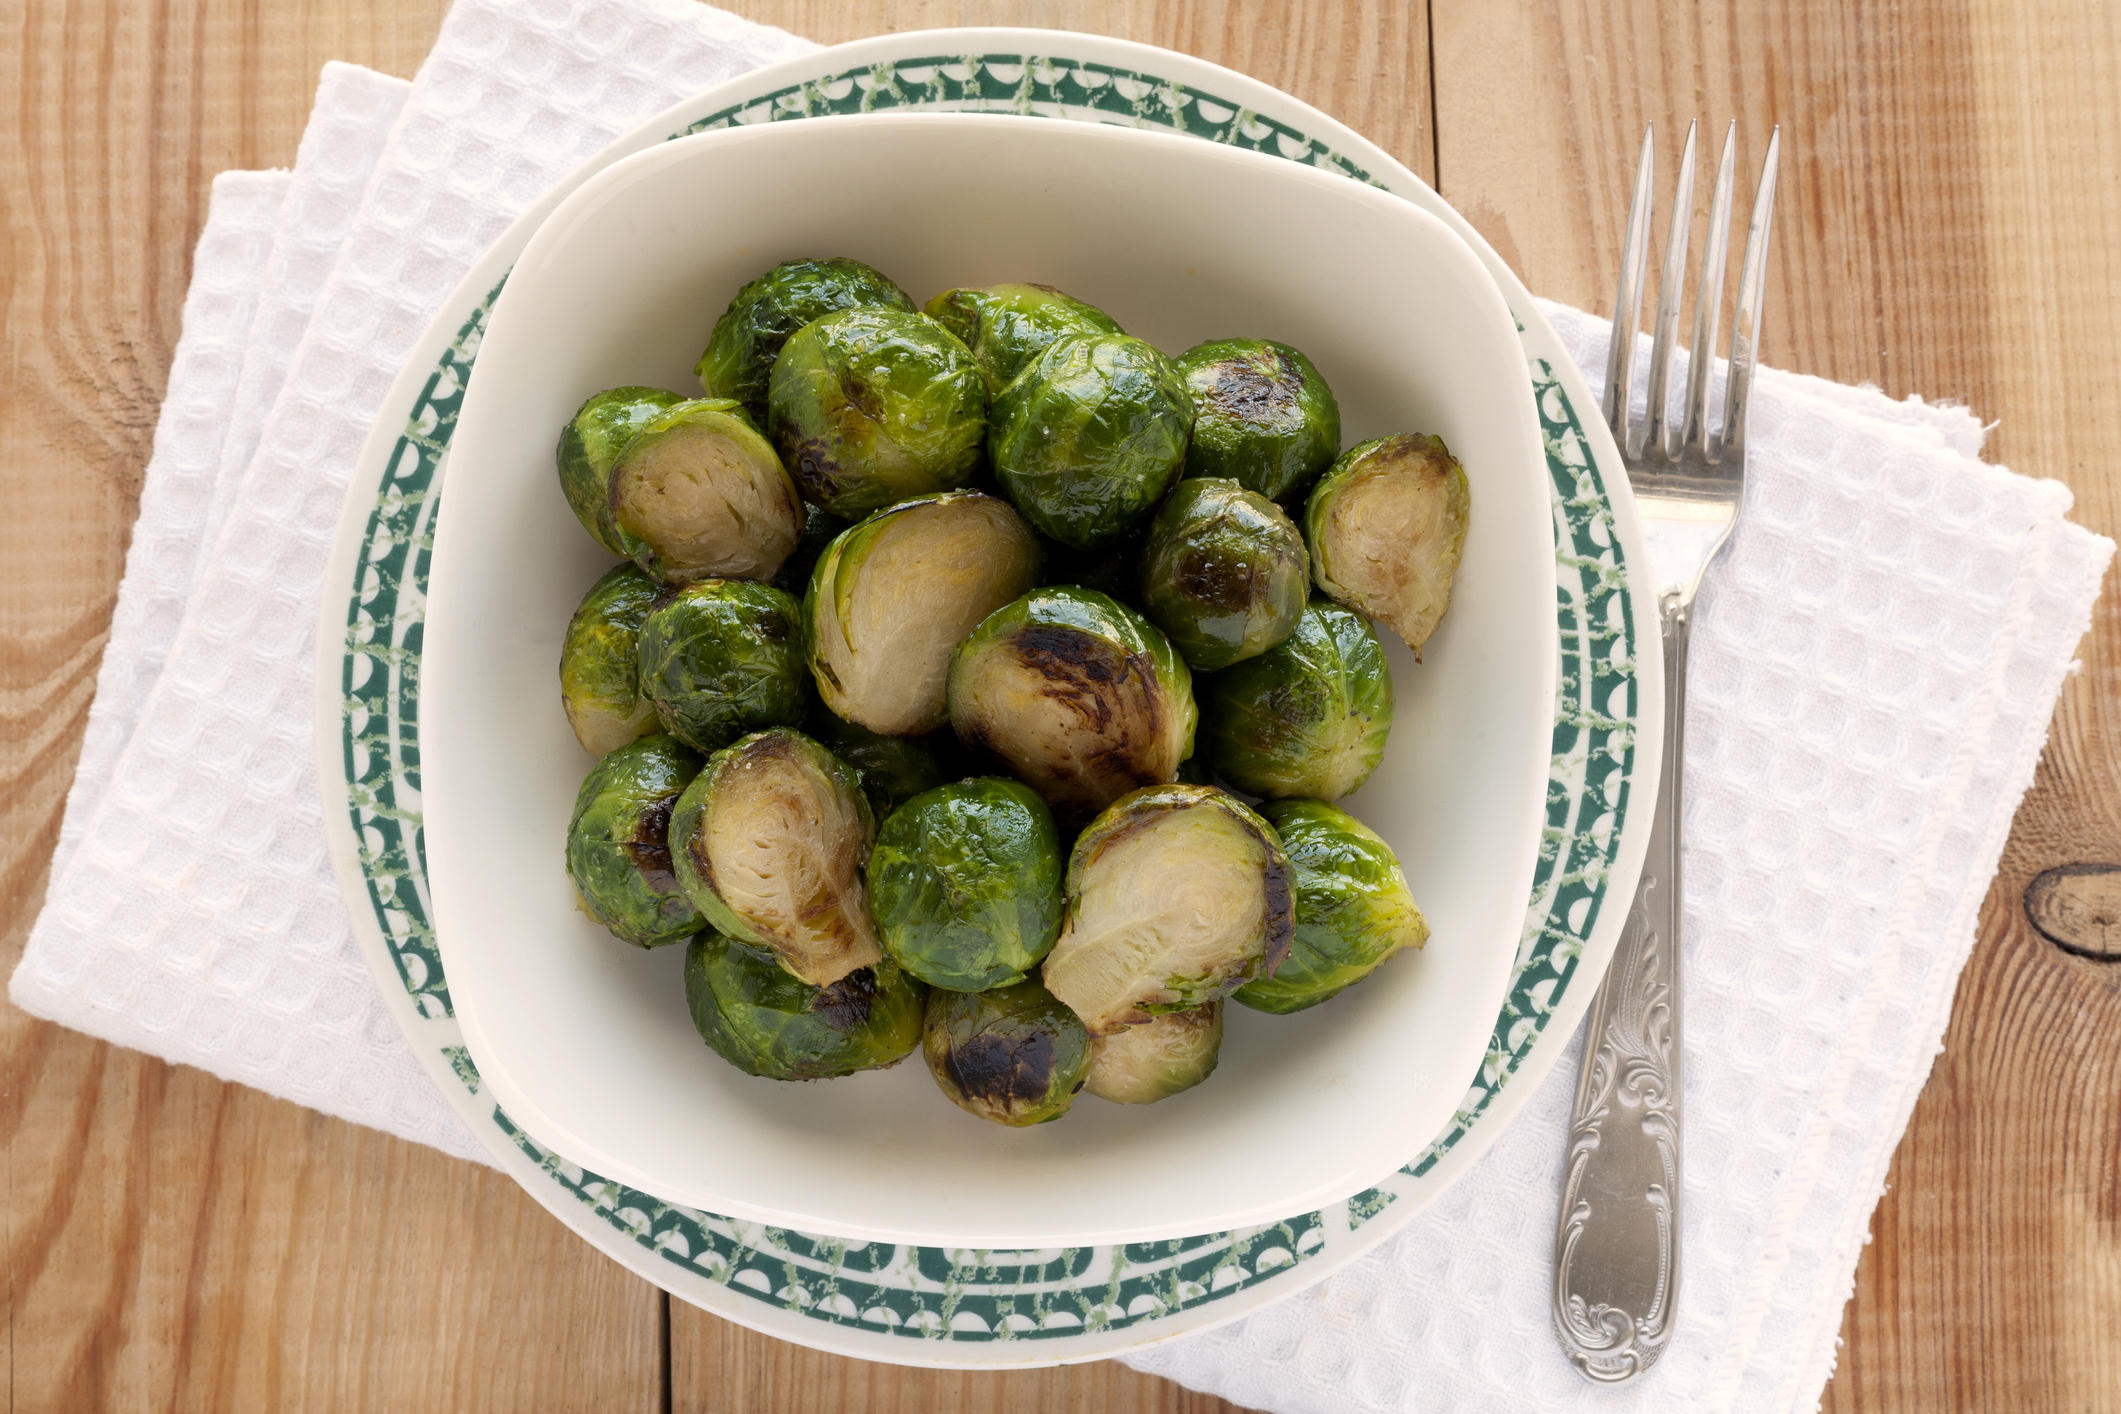 7. Brussels Sprouts 